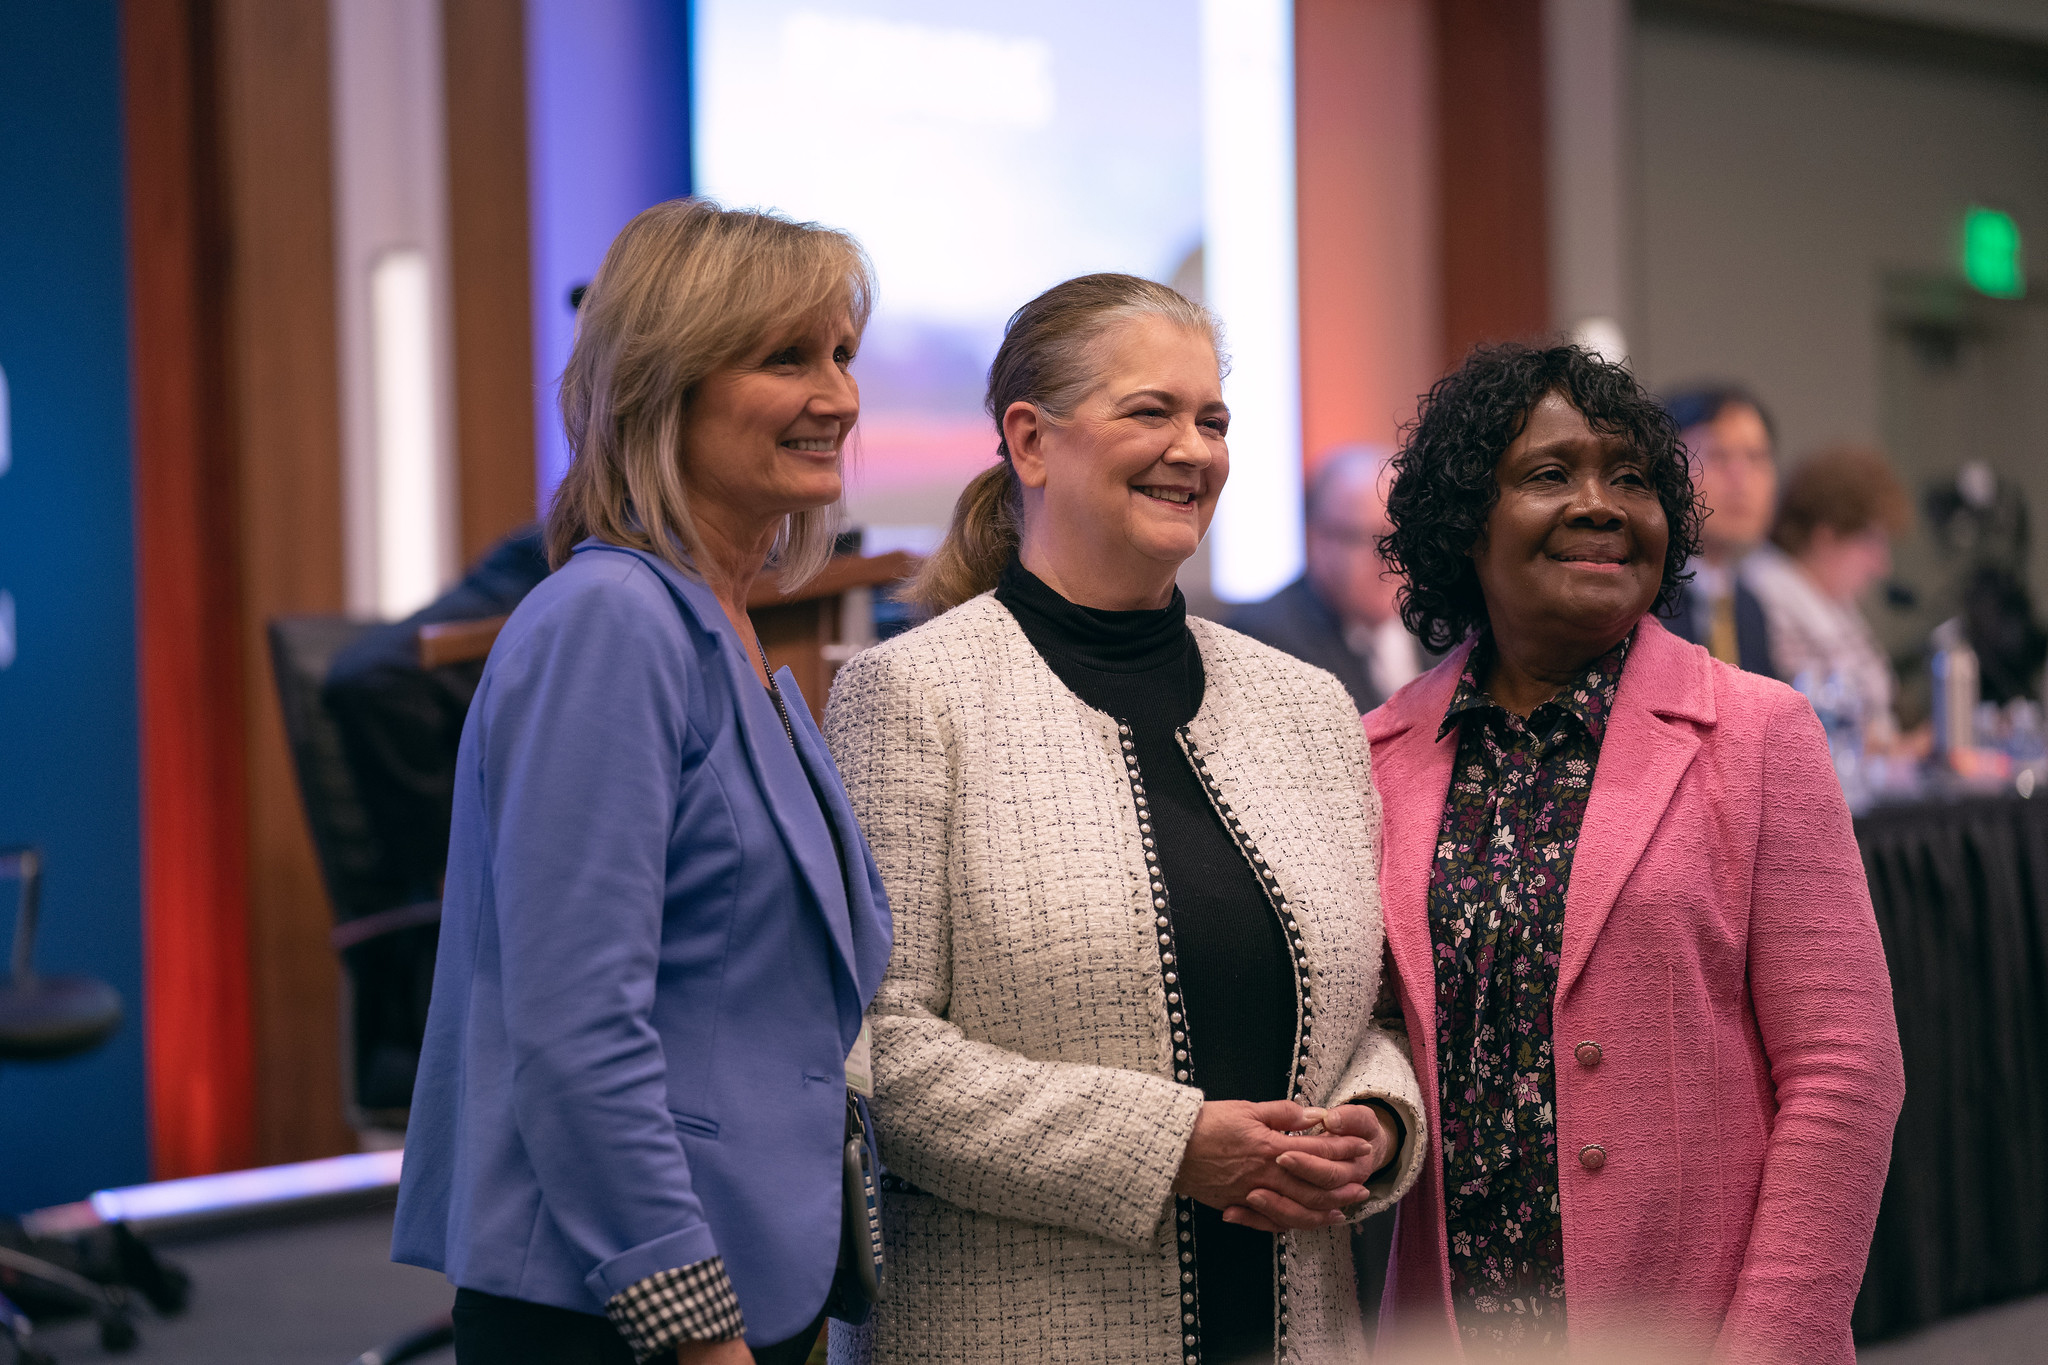 Bonita Shields, Debra Brill, and Ella Simmons pose for a photo together on Nov. 3, 2019, during the NAD Year-End Meeting morning program